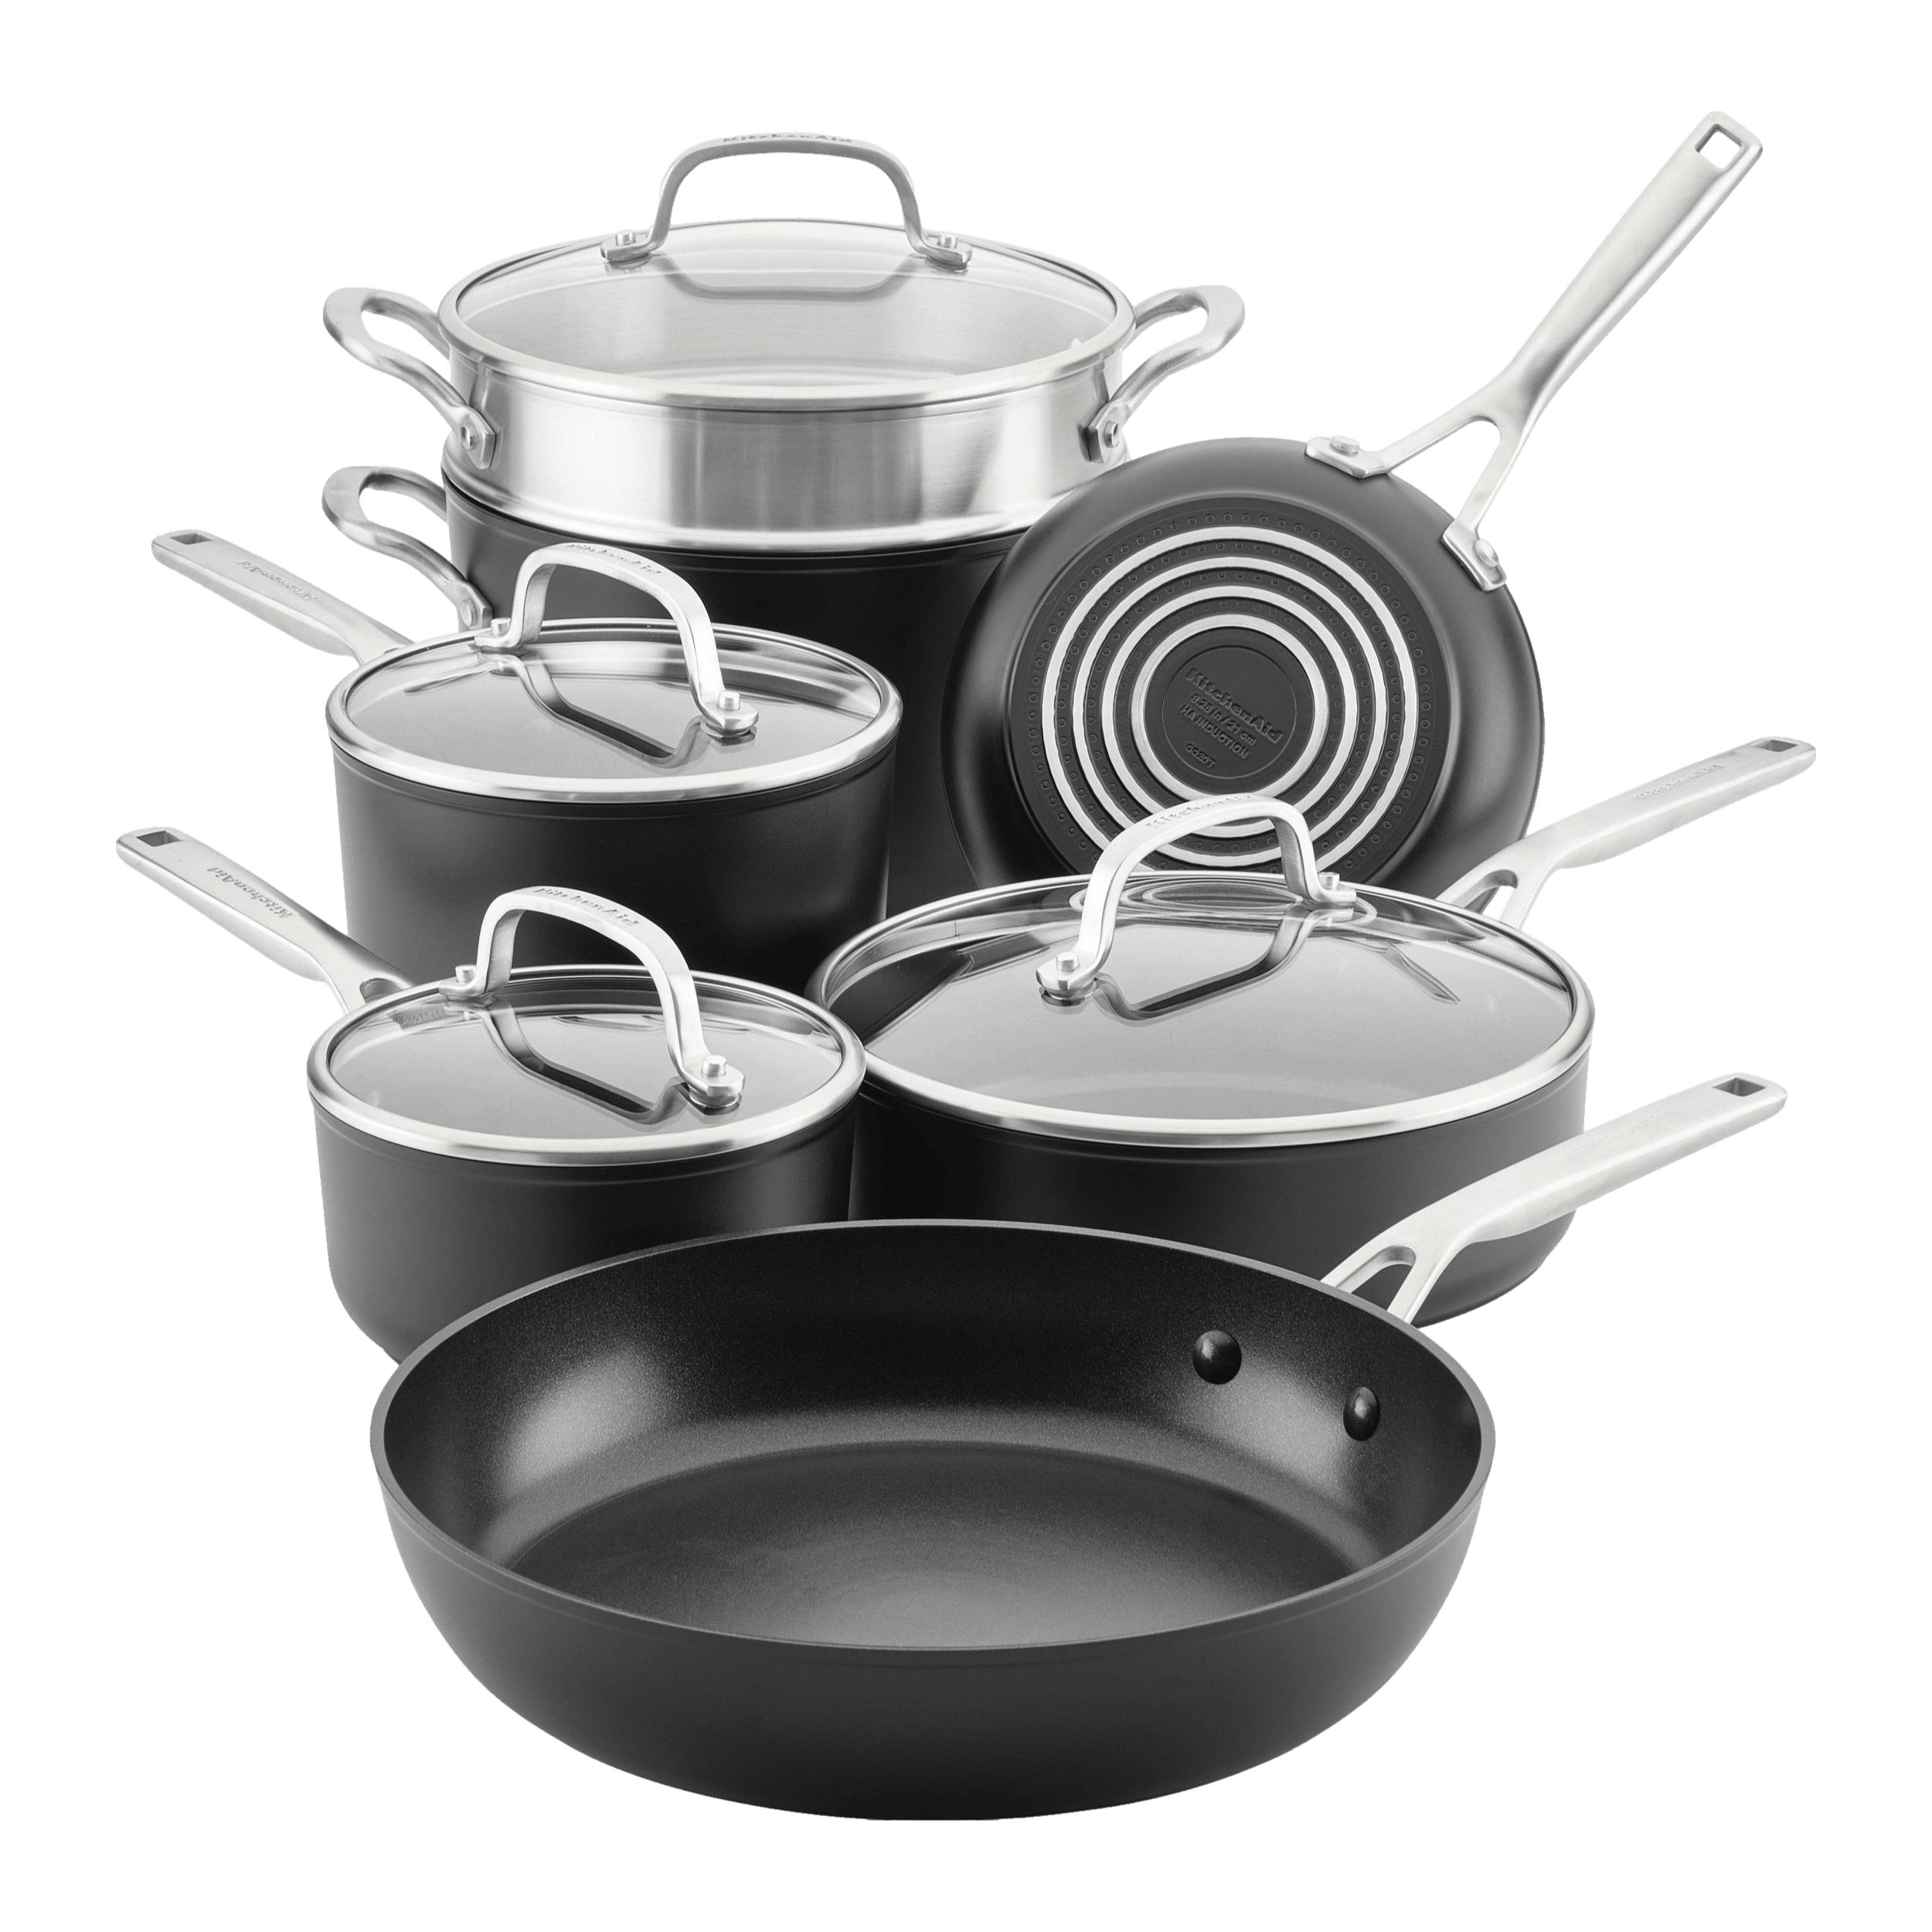 G5™ Graphite Core Stainless Steel 5-ply Bonded Cookware, 10 Piece Set